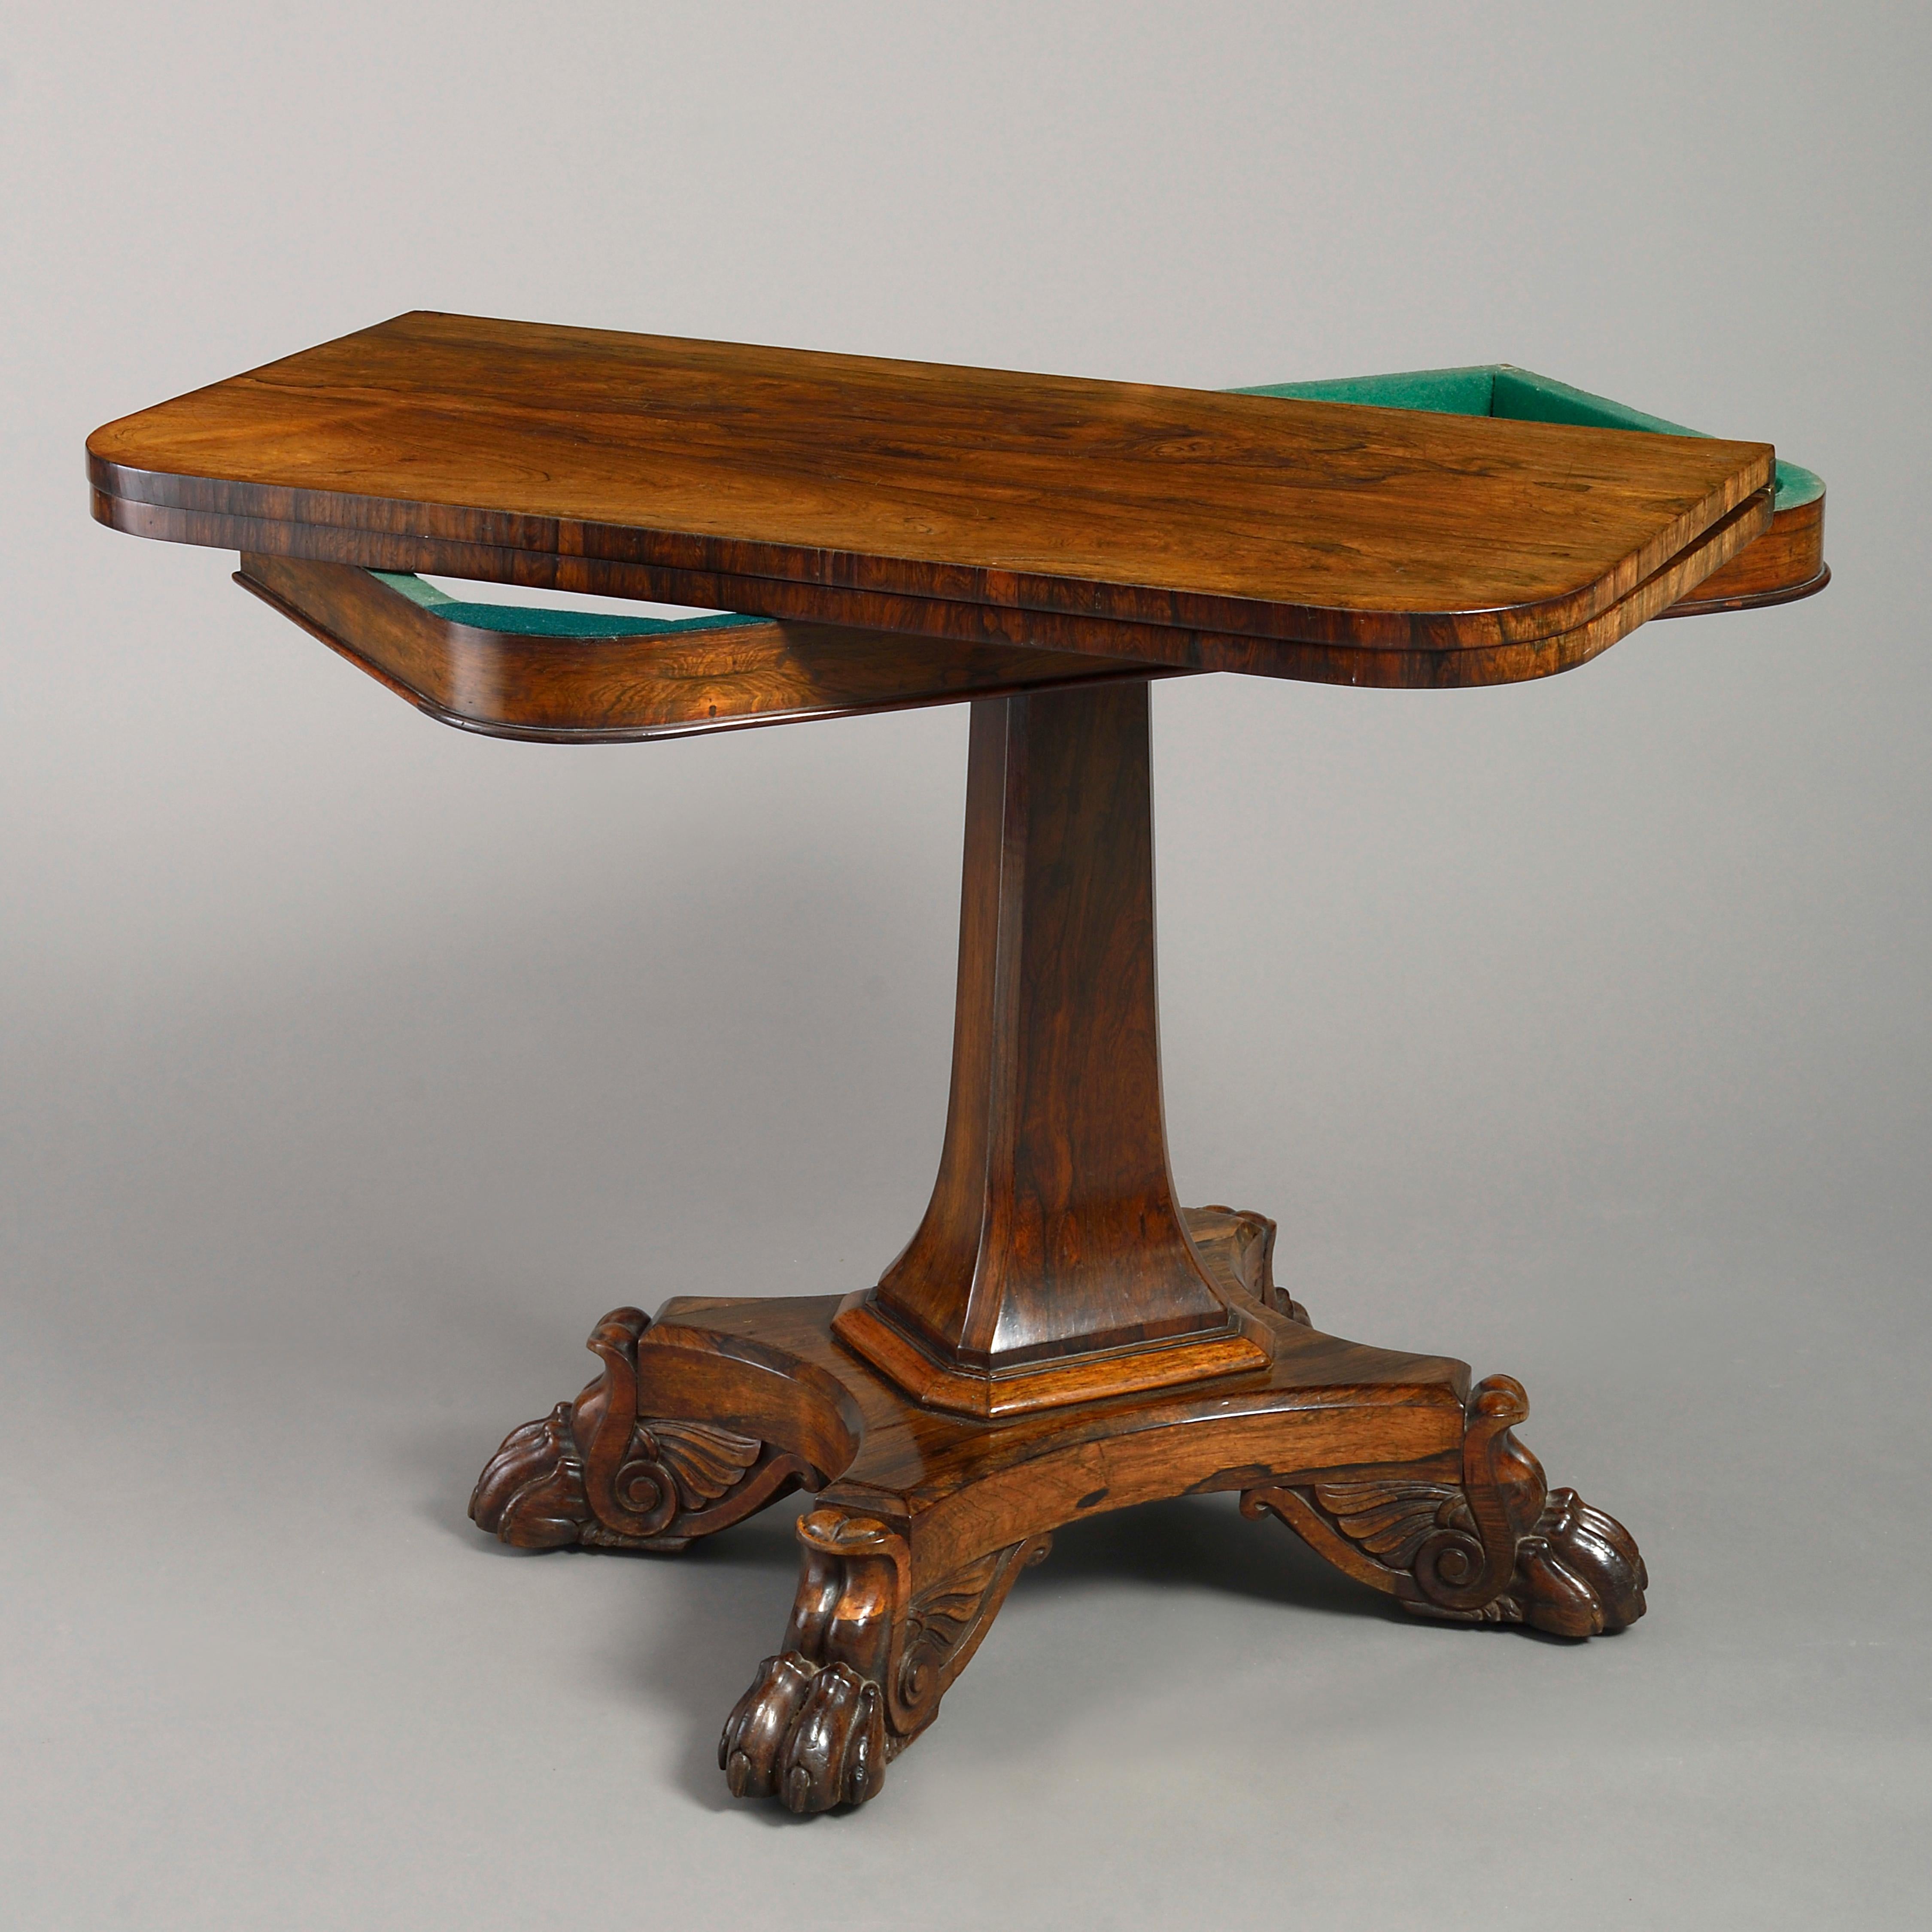 English Early 19th Century Regency Period Rosewood Tea Table